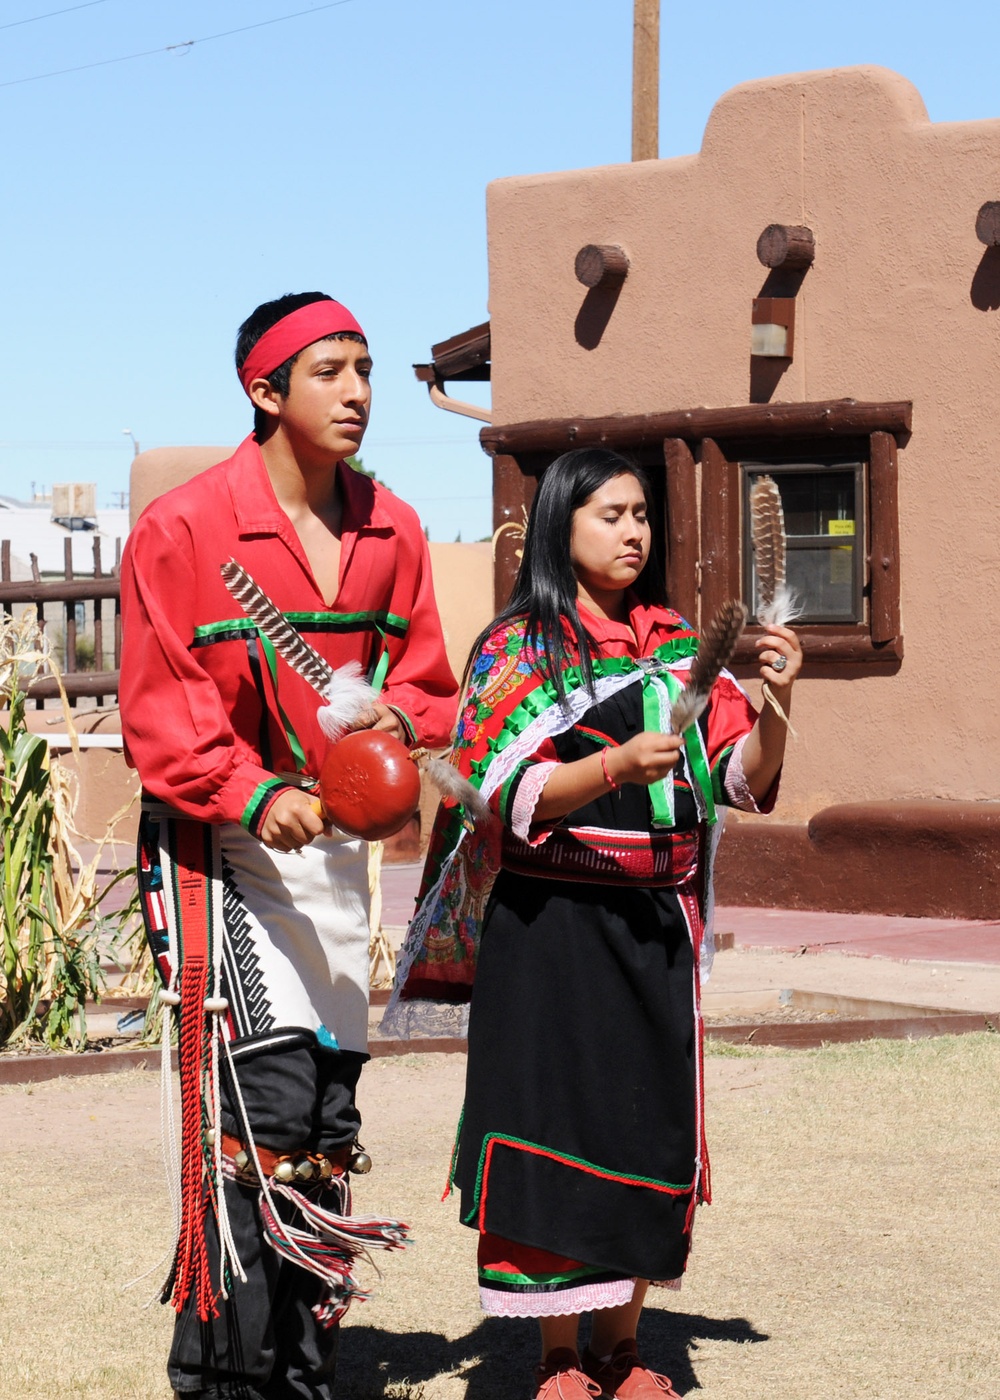 Native American culture alive and well in El Paso